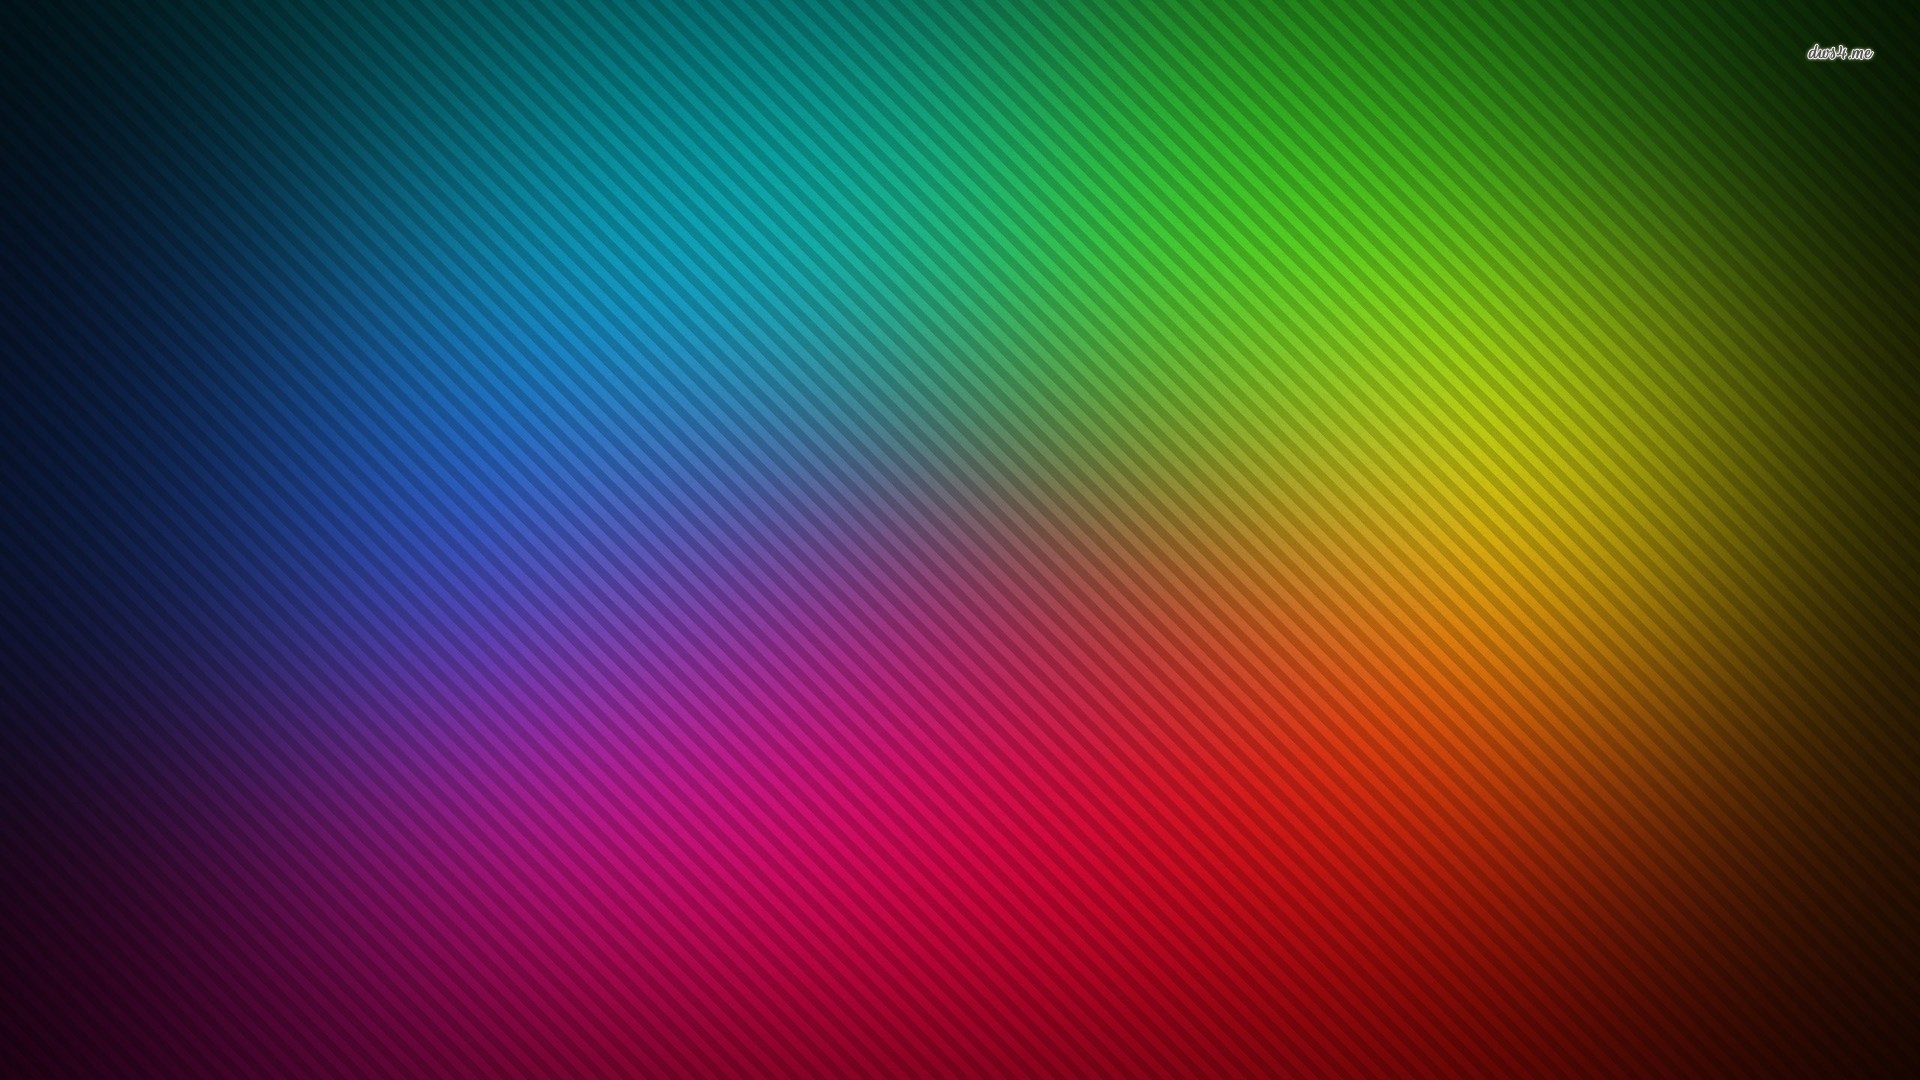 1920x1080 Neon stripes wallpaper Neon stripes wallpaper - Abstract wallpapers - #